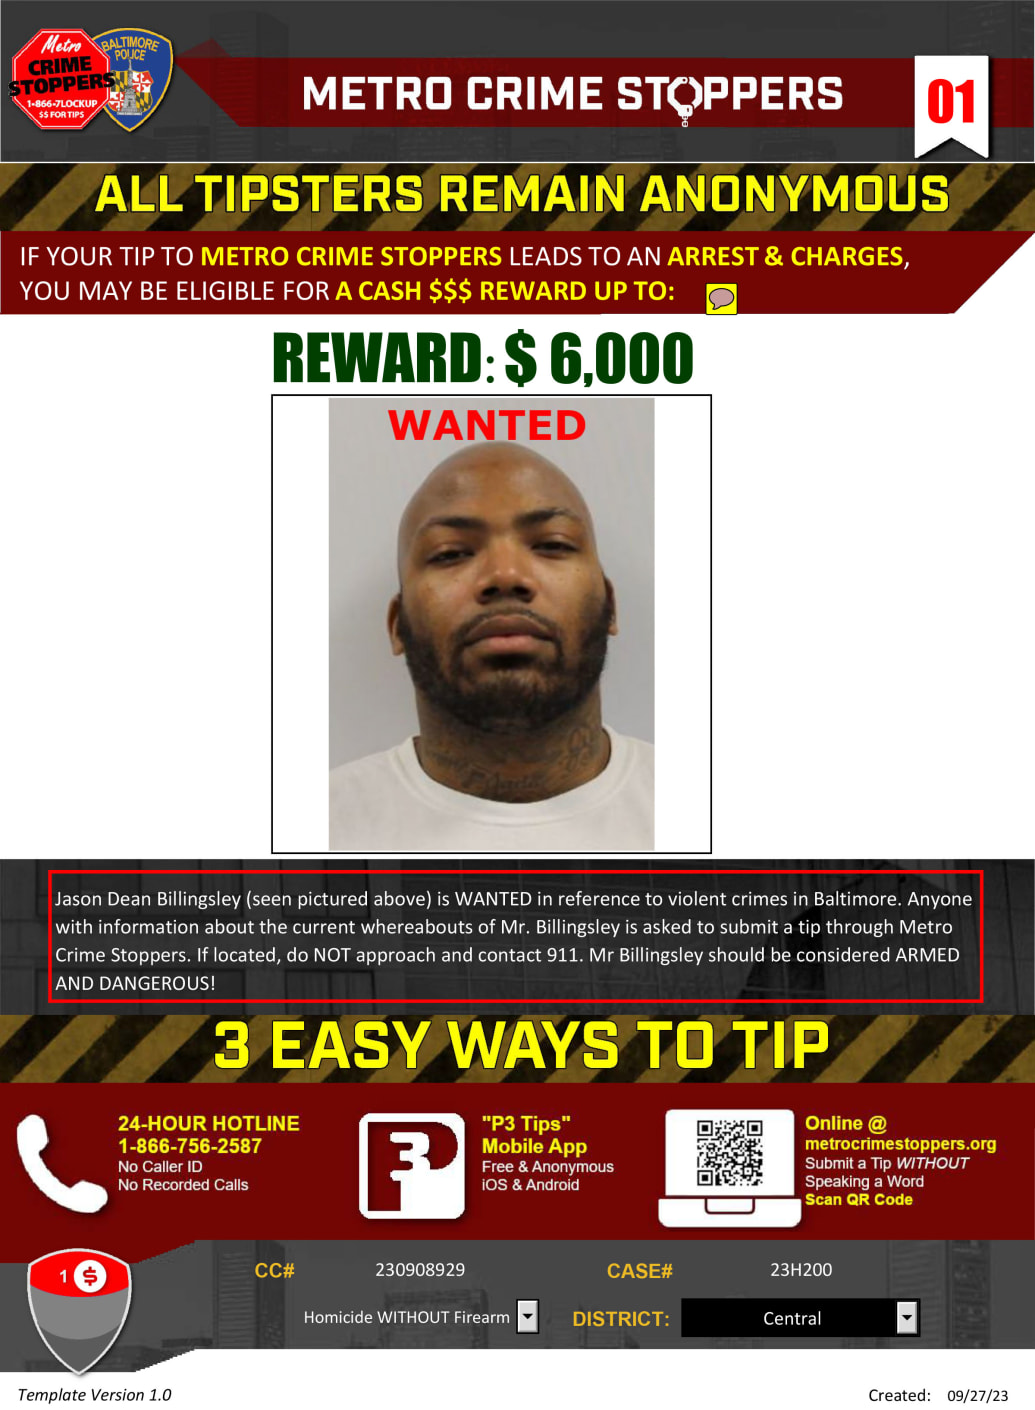 A wanted poster for Jason Dean Billingsley.